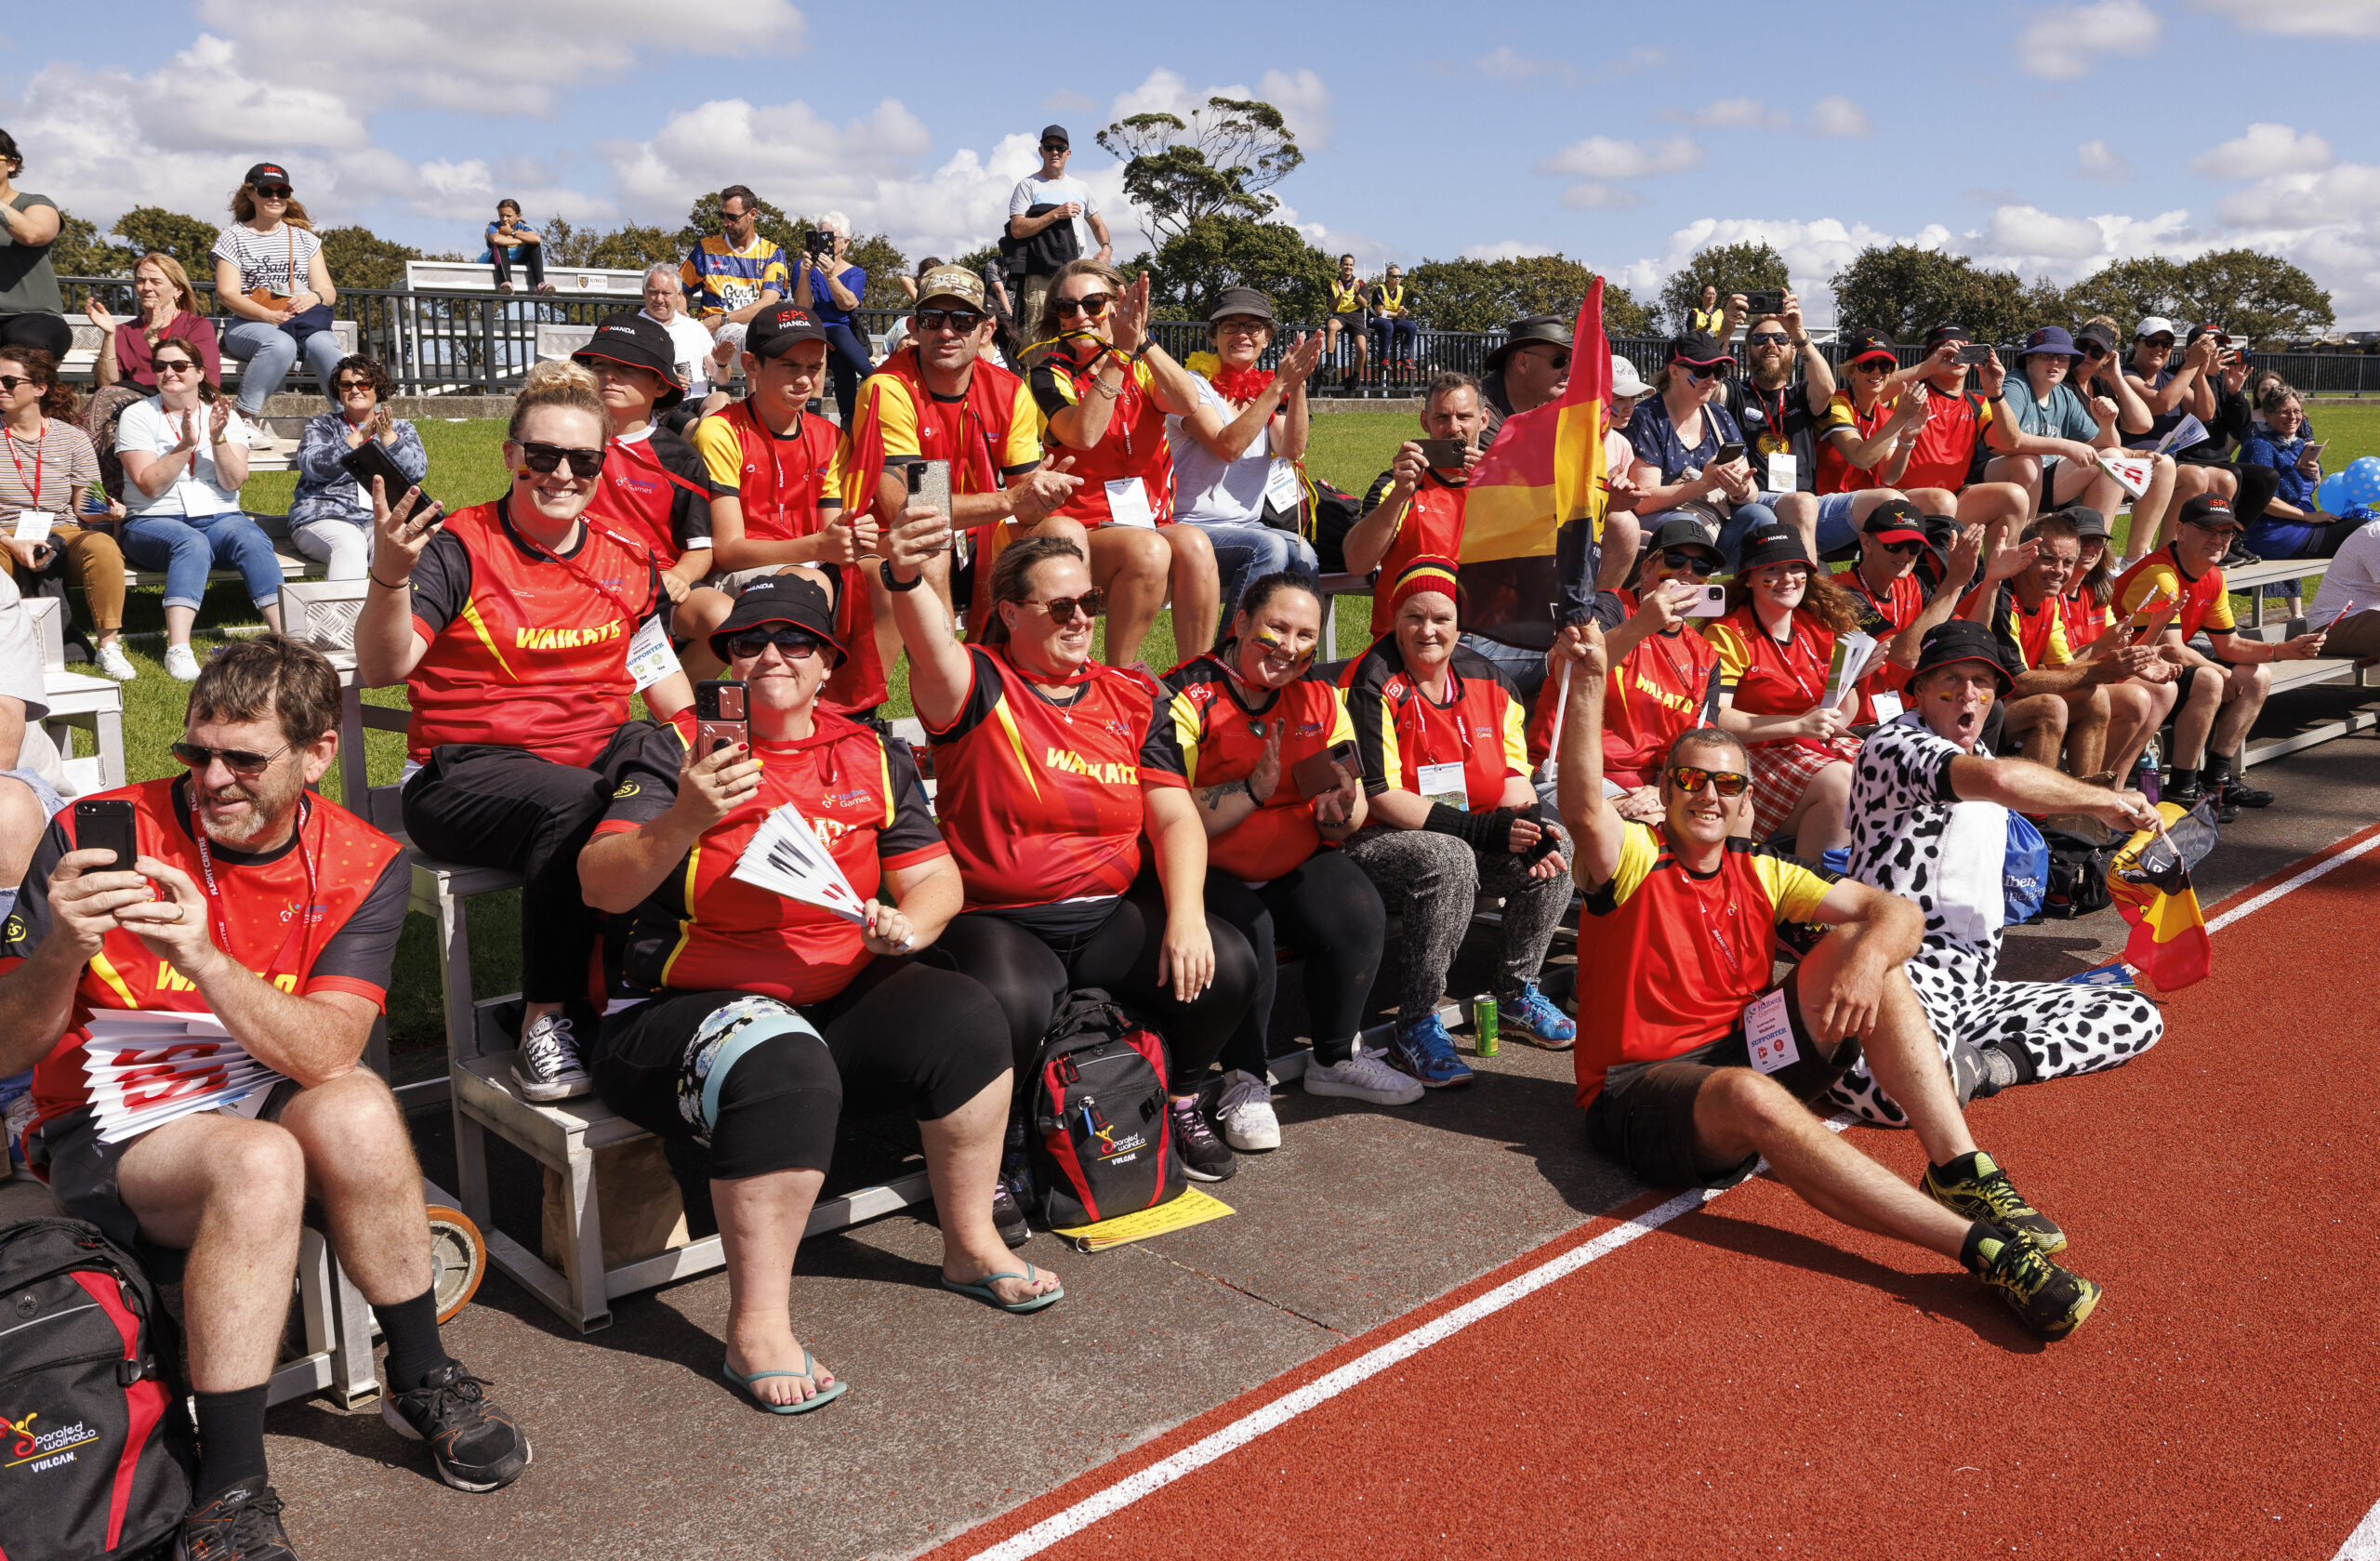 Crowd of Waikato supporters cheering and smiling on the sideline benches of a running track